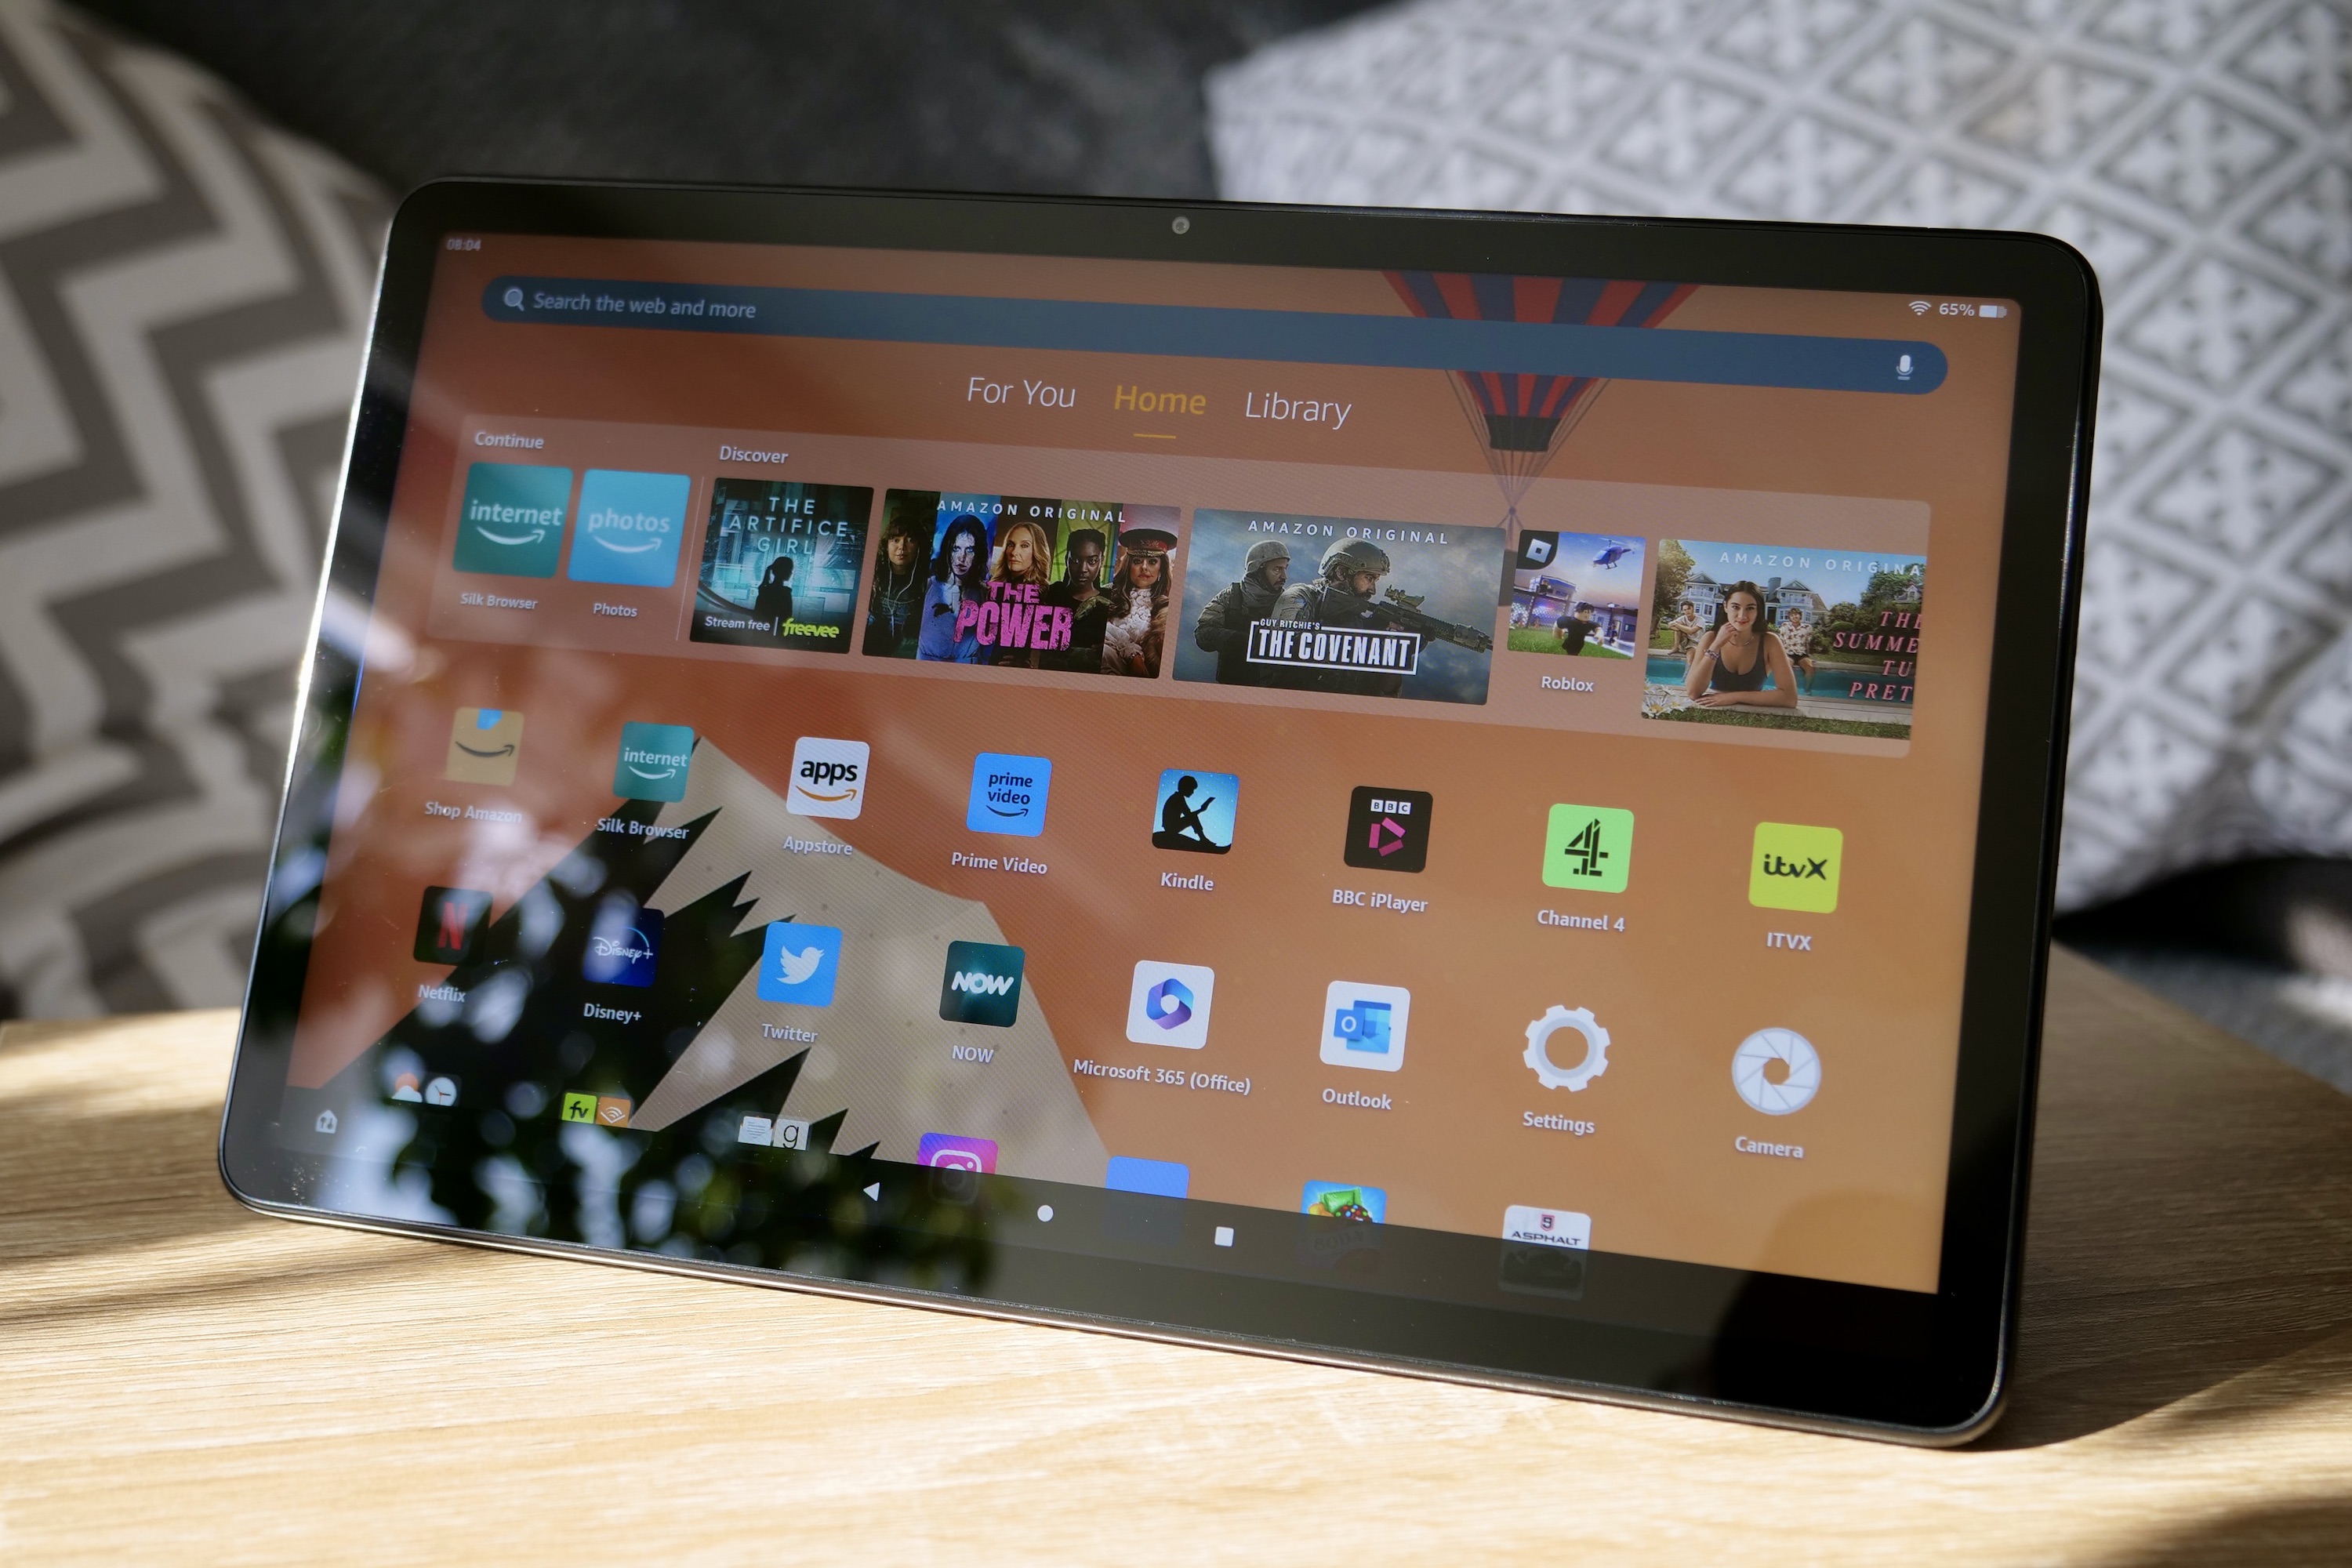 launches Alexa on new and old Fire tablets